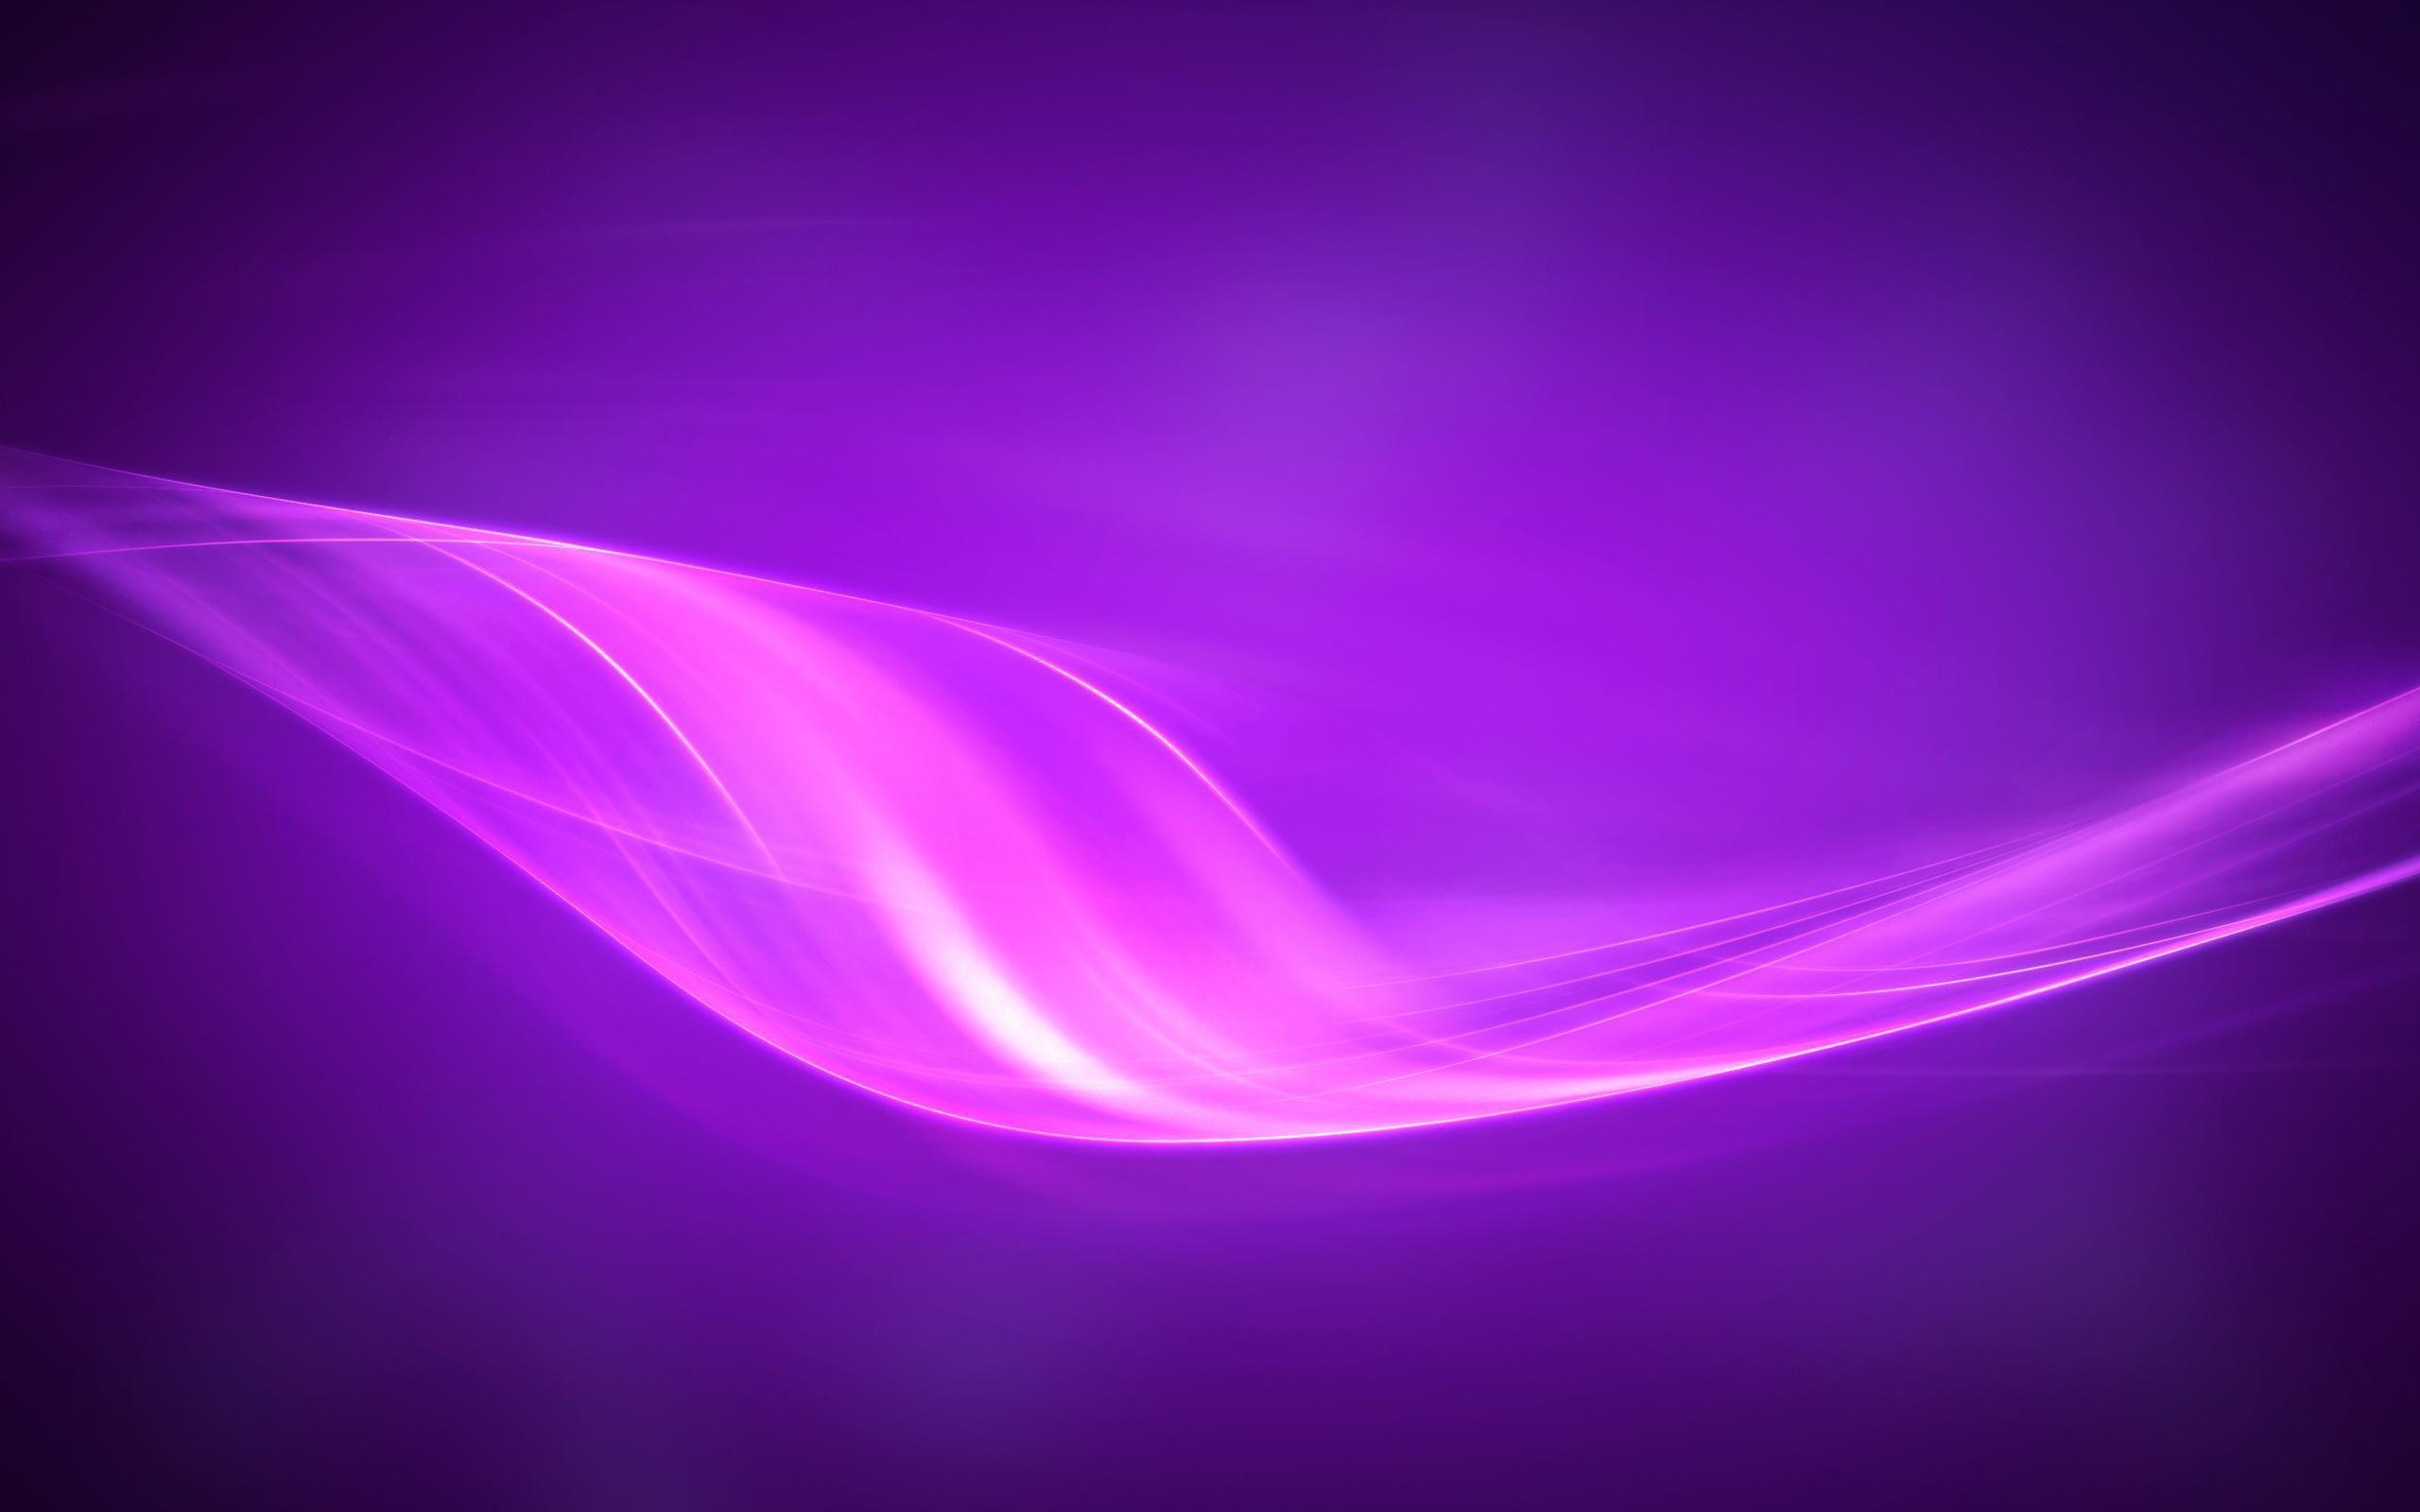 Flux pinkish nice abstract wave free desktop background